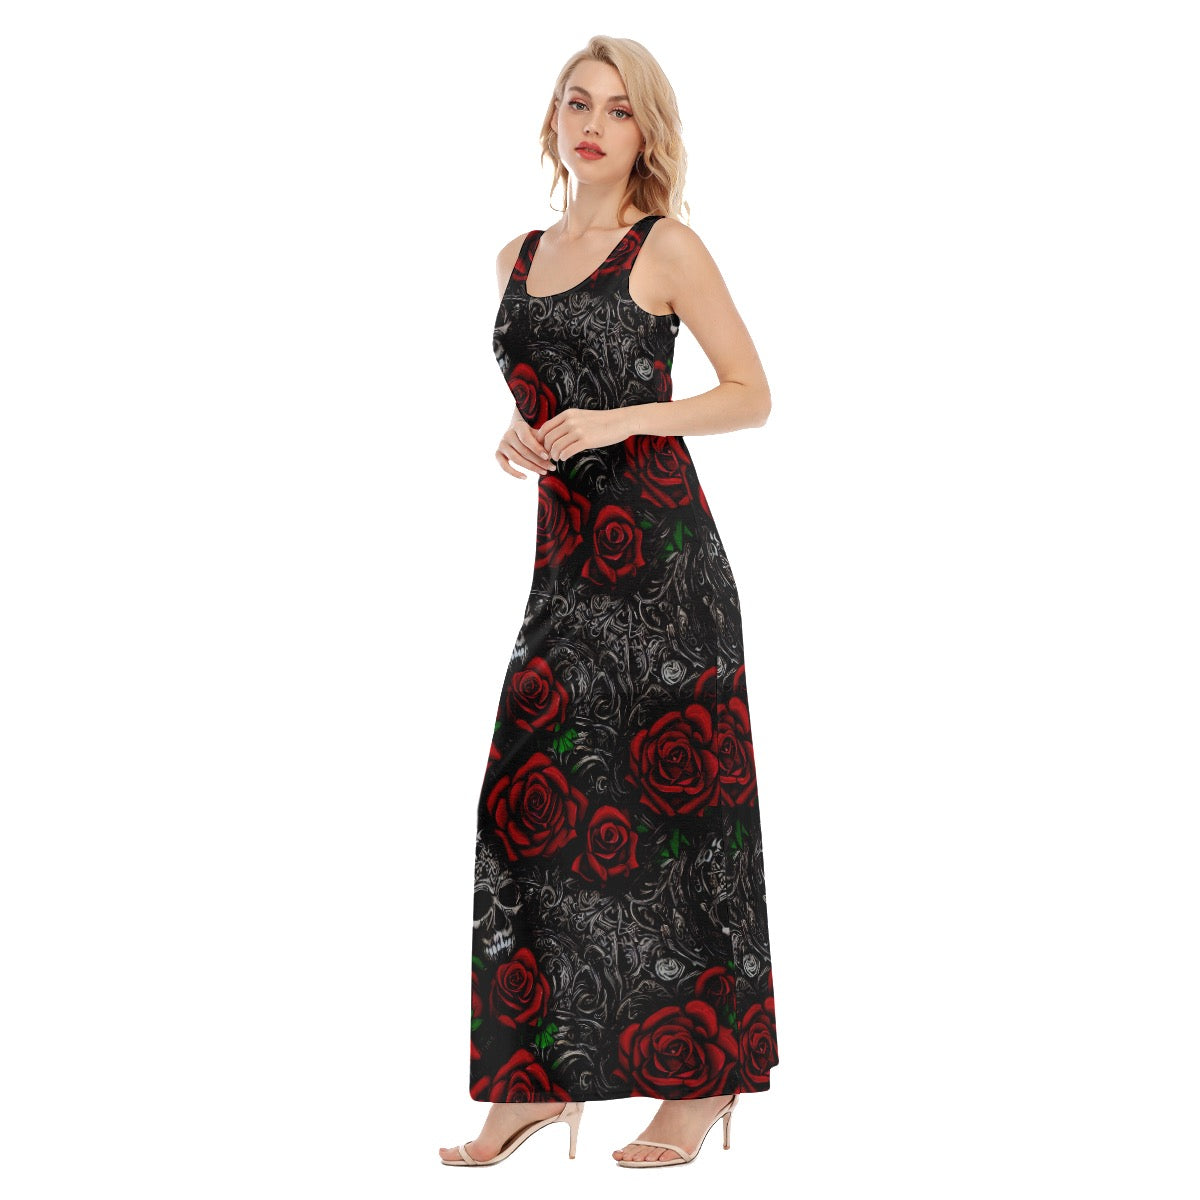 Women's Gothic Red and Black Skull and Roses Pattern Maxi Dress